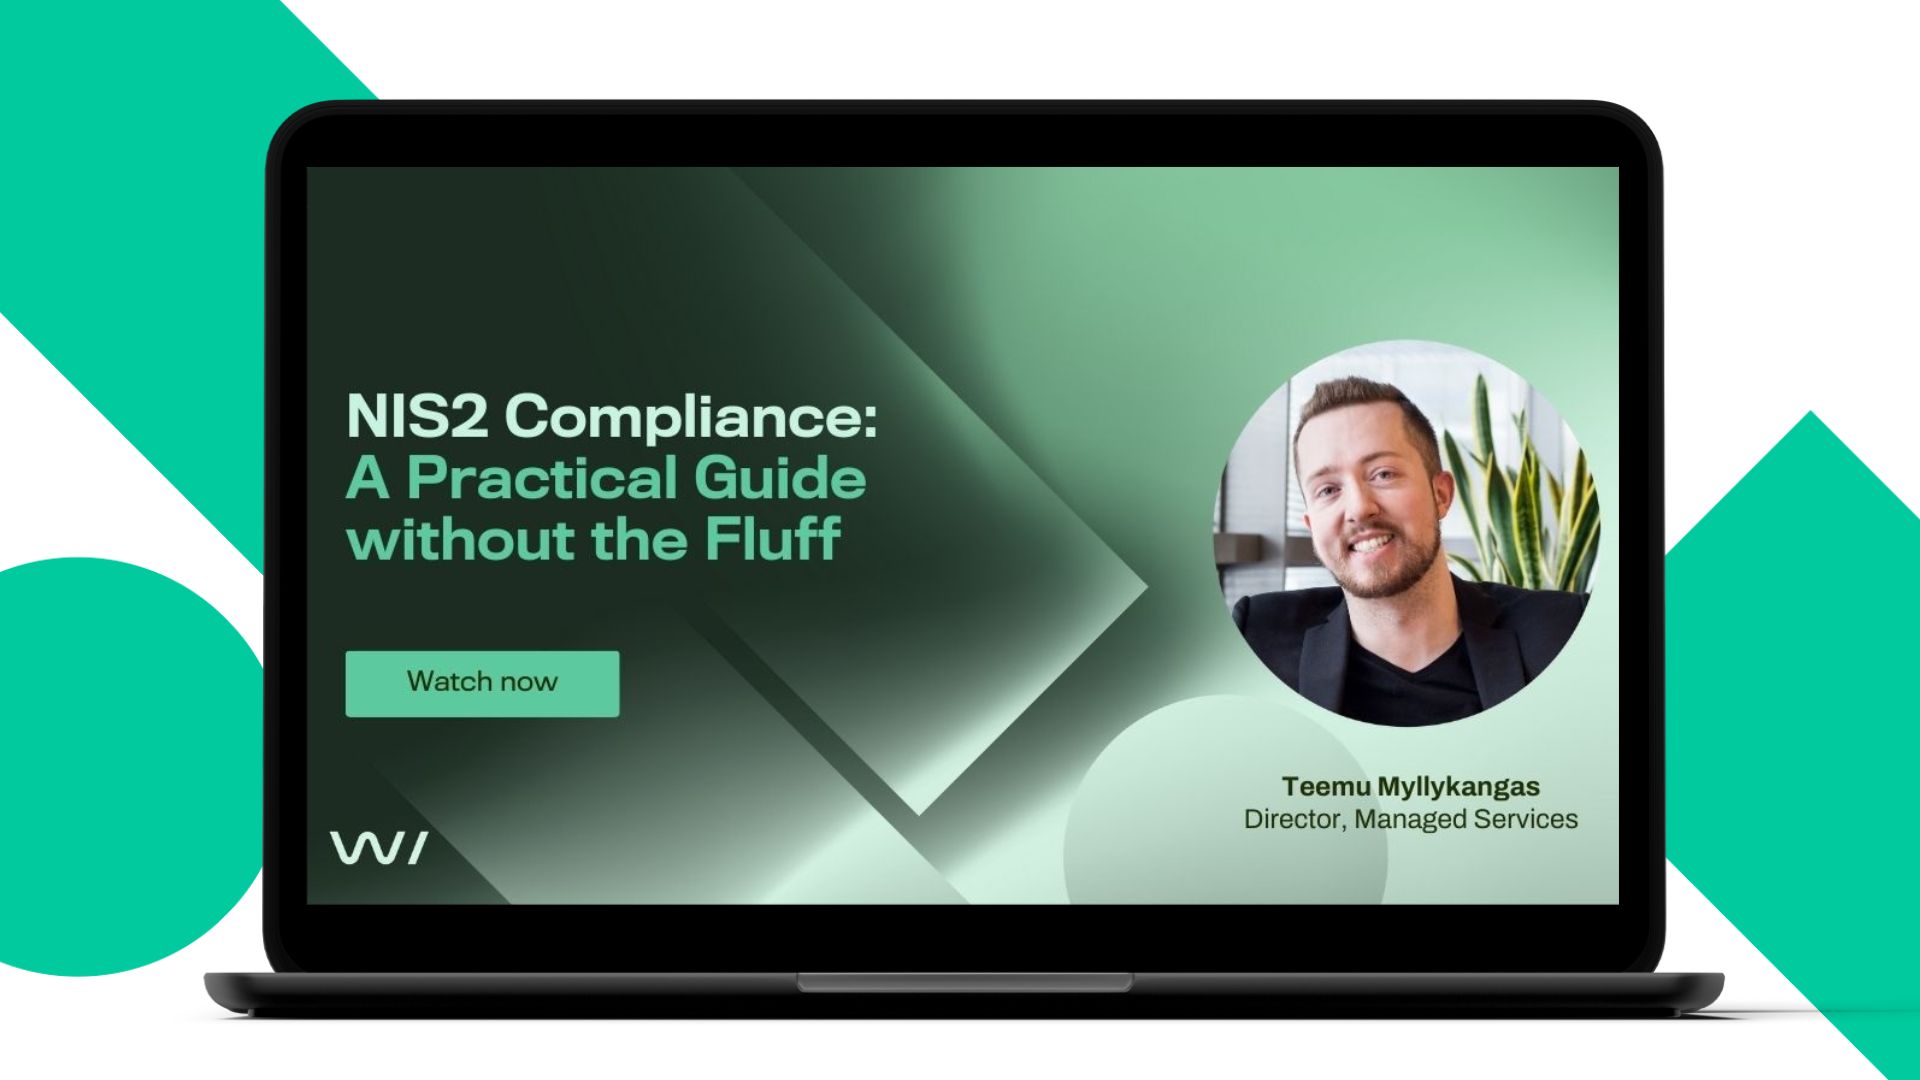 NIS2 compliance - A practical guide without the fluff